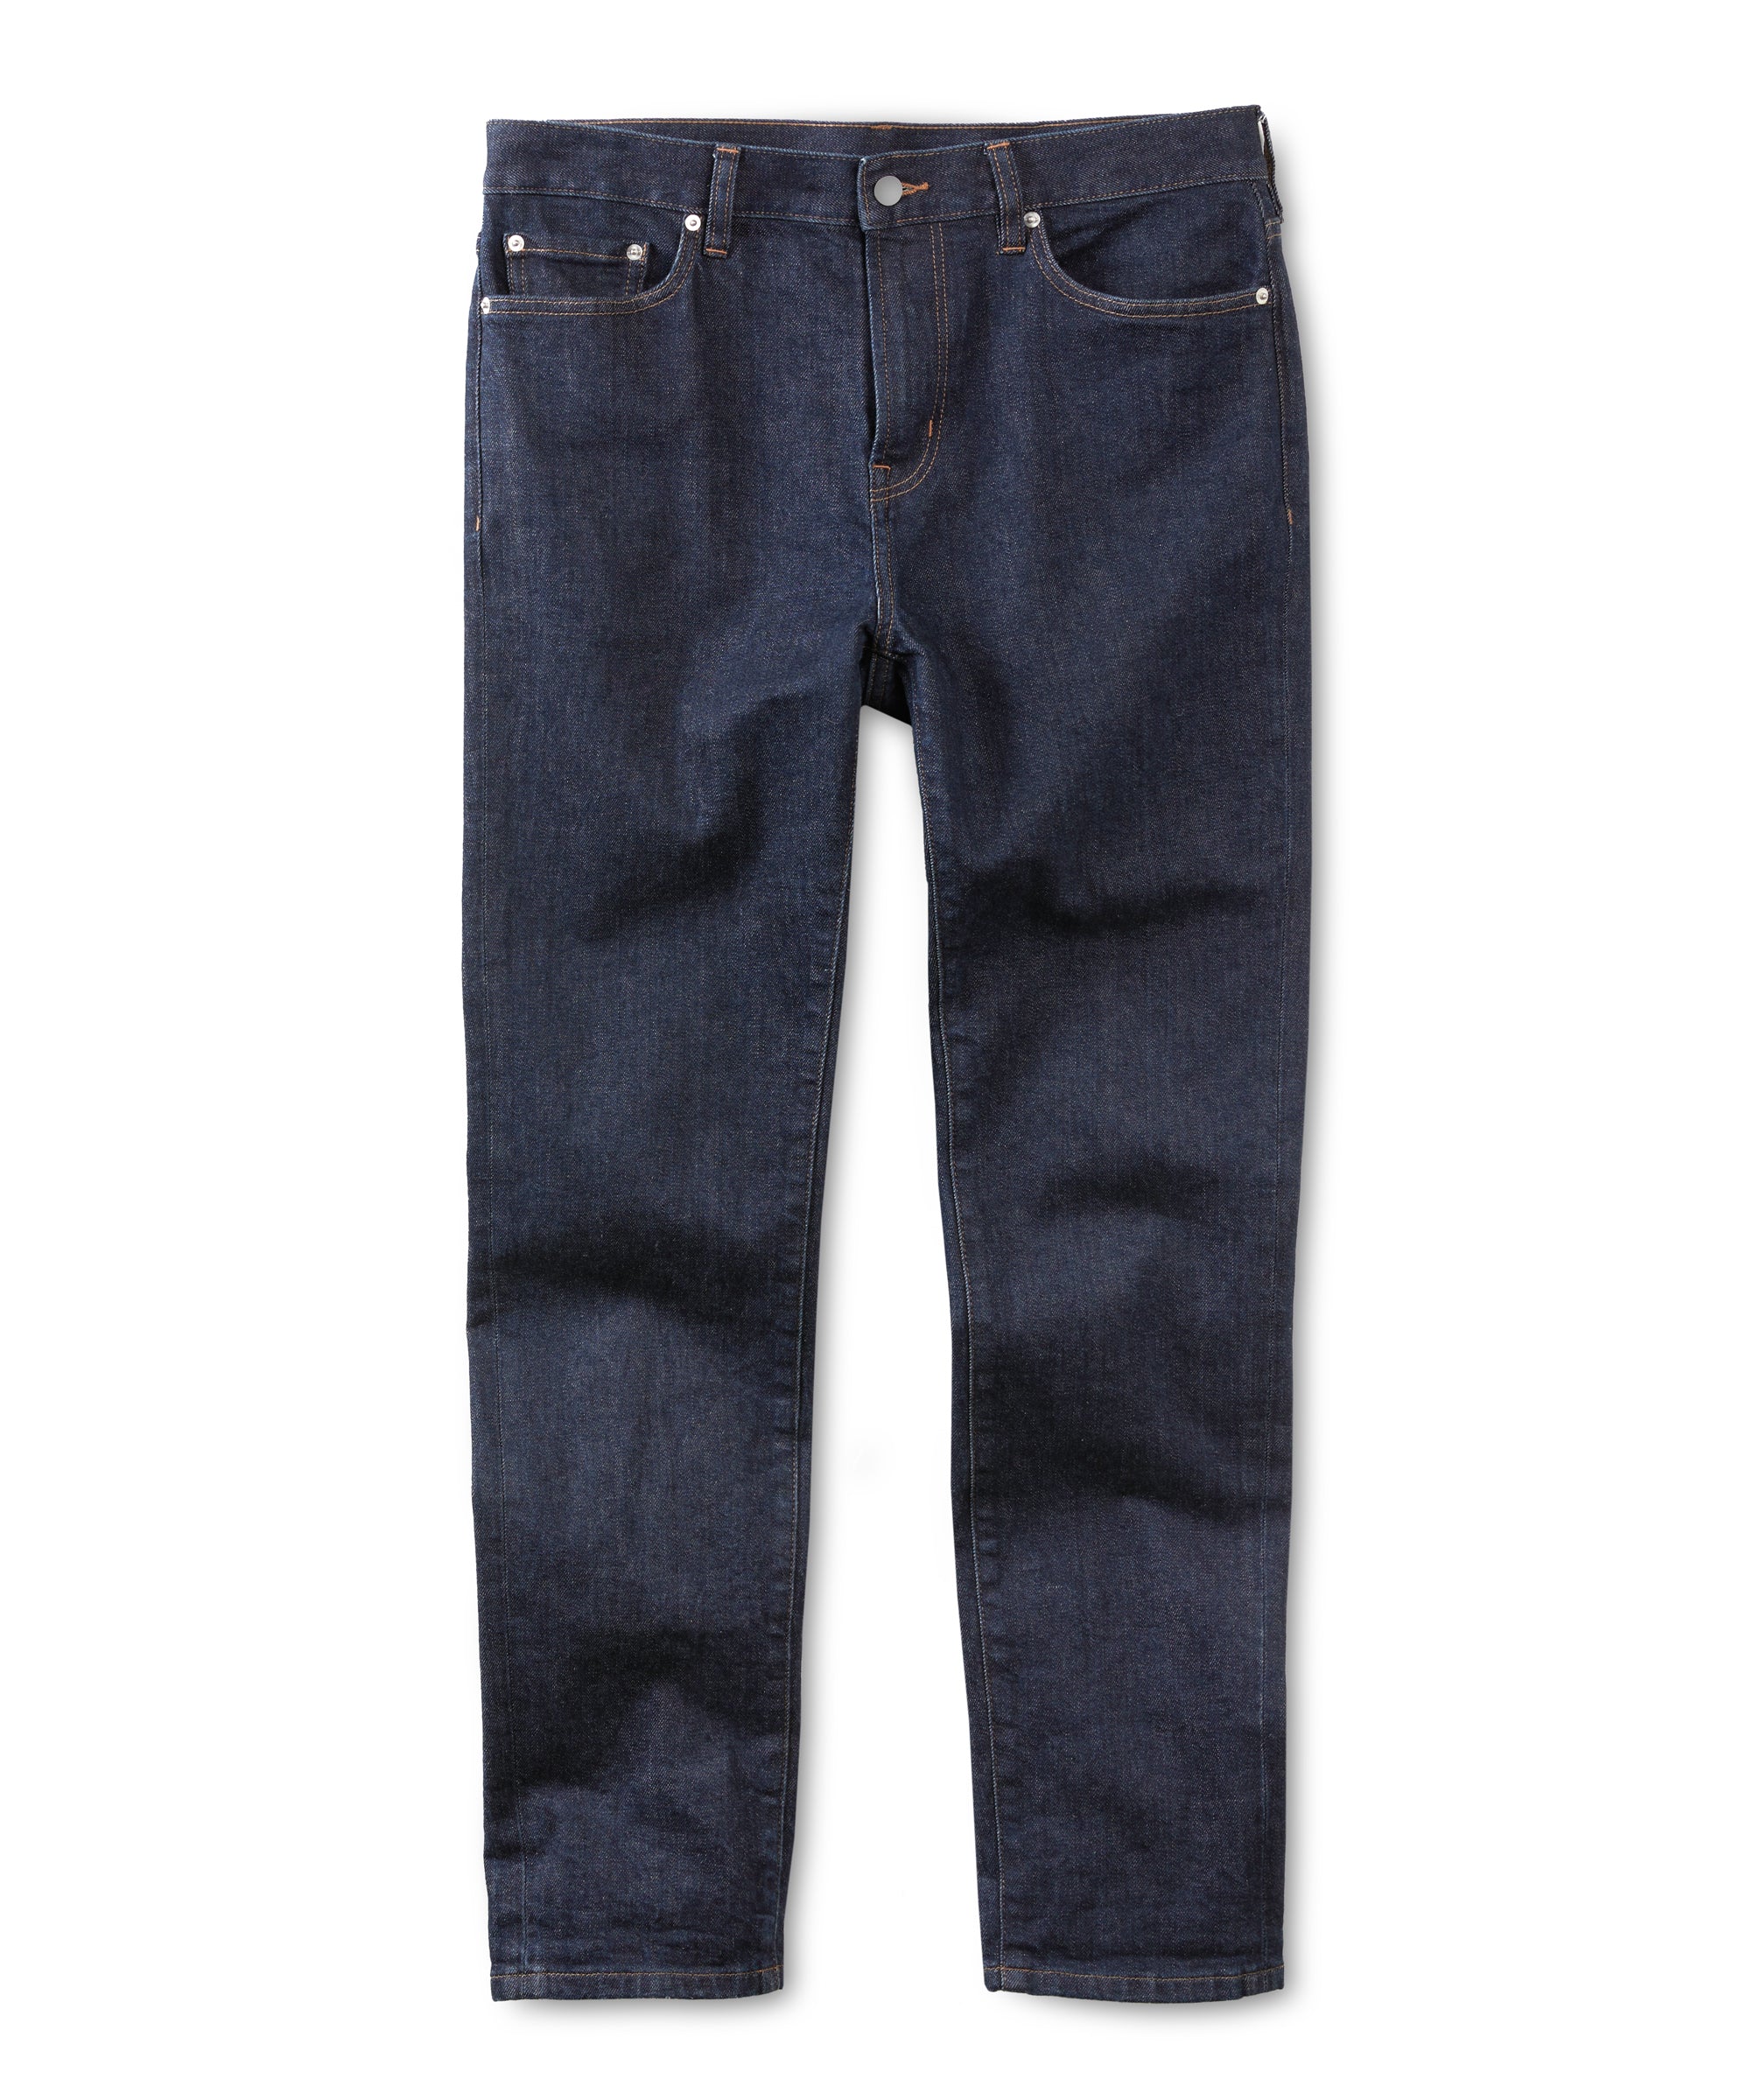 Drifter Tapered Fit | Men's Pants | Outerknown